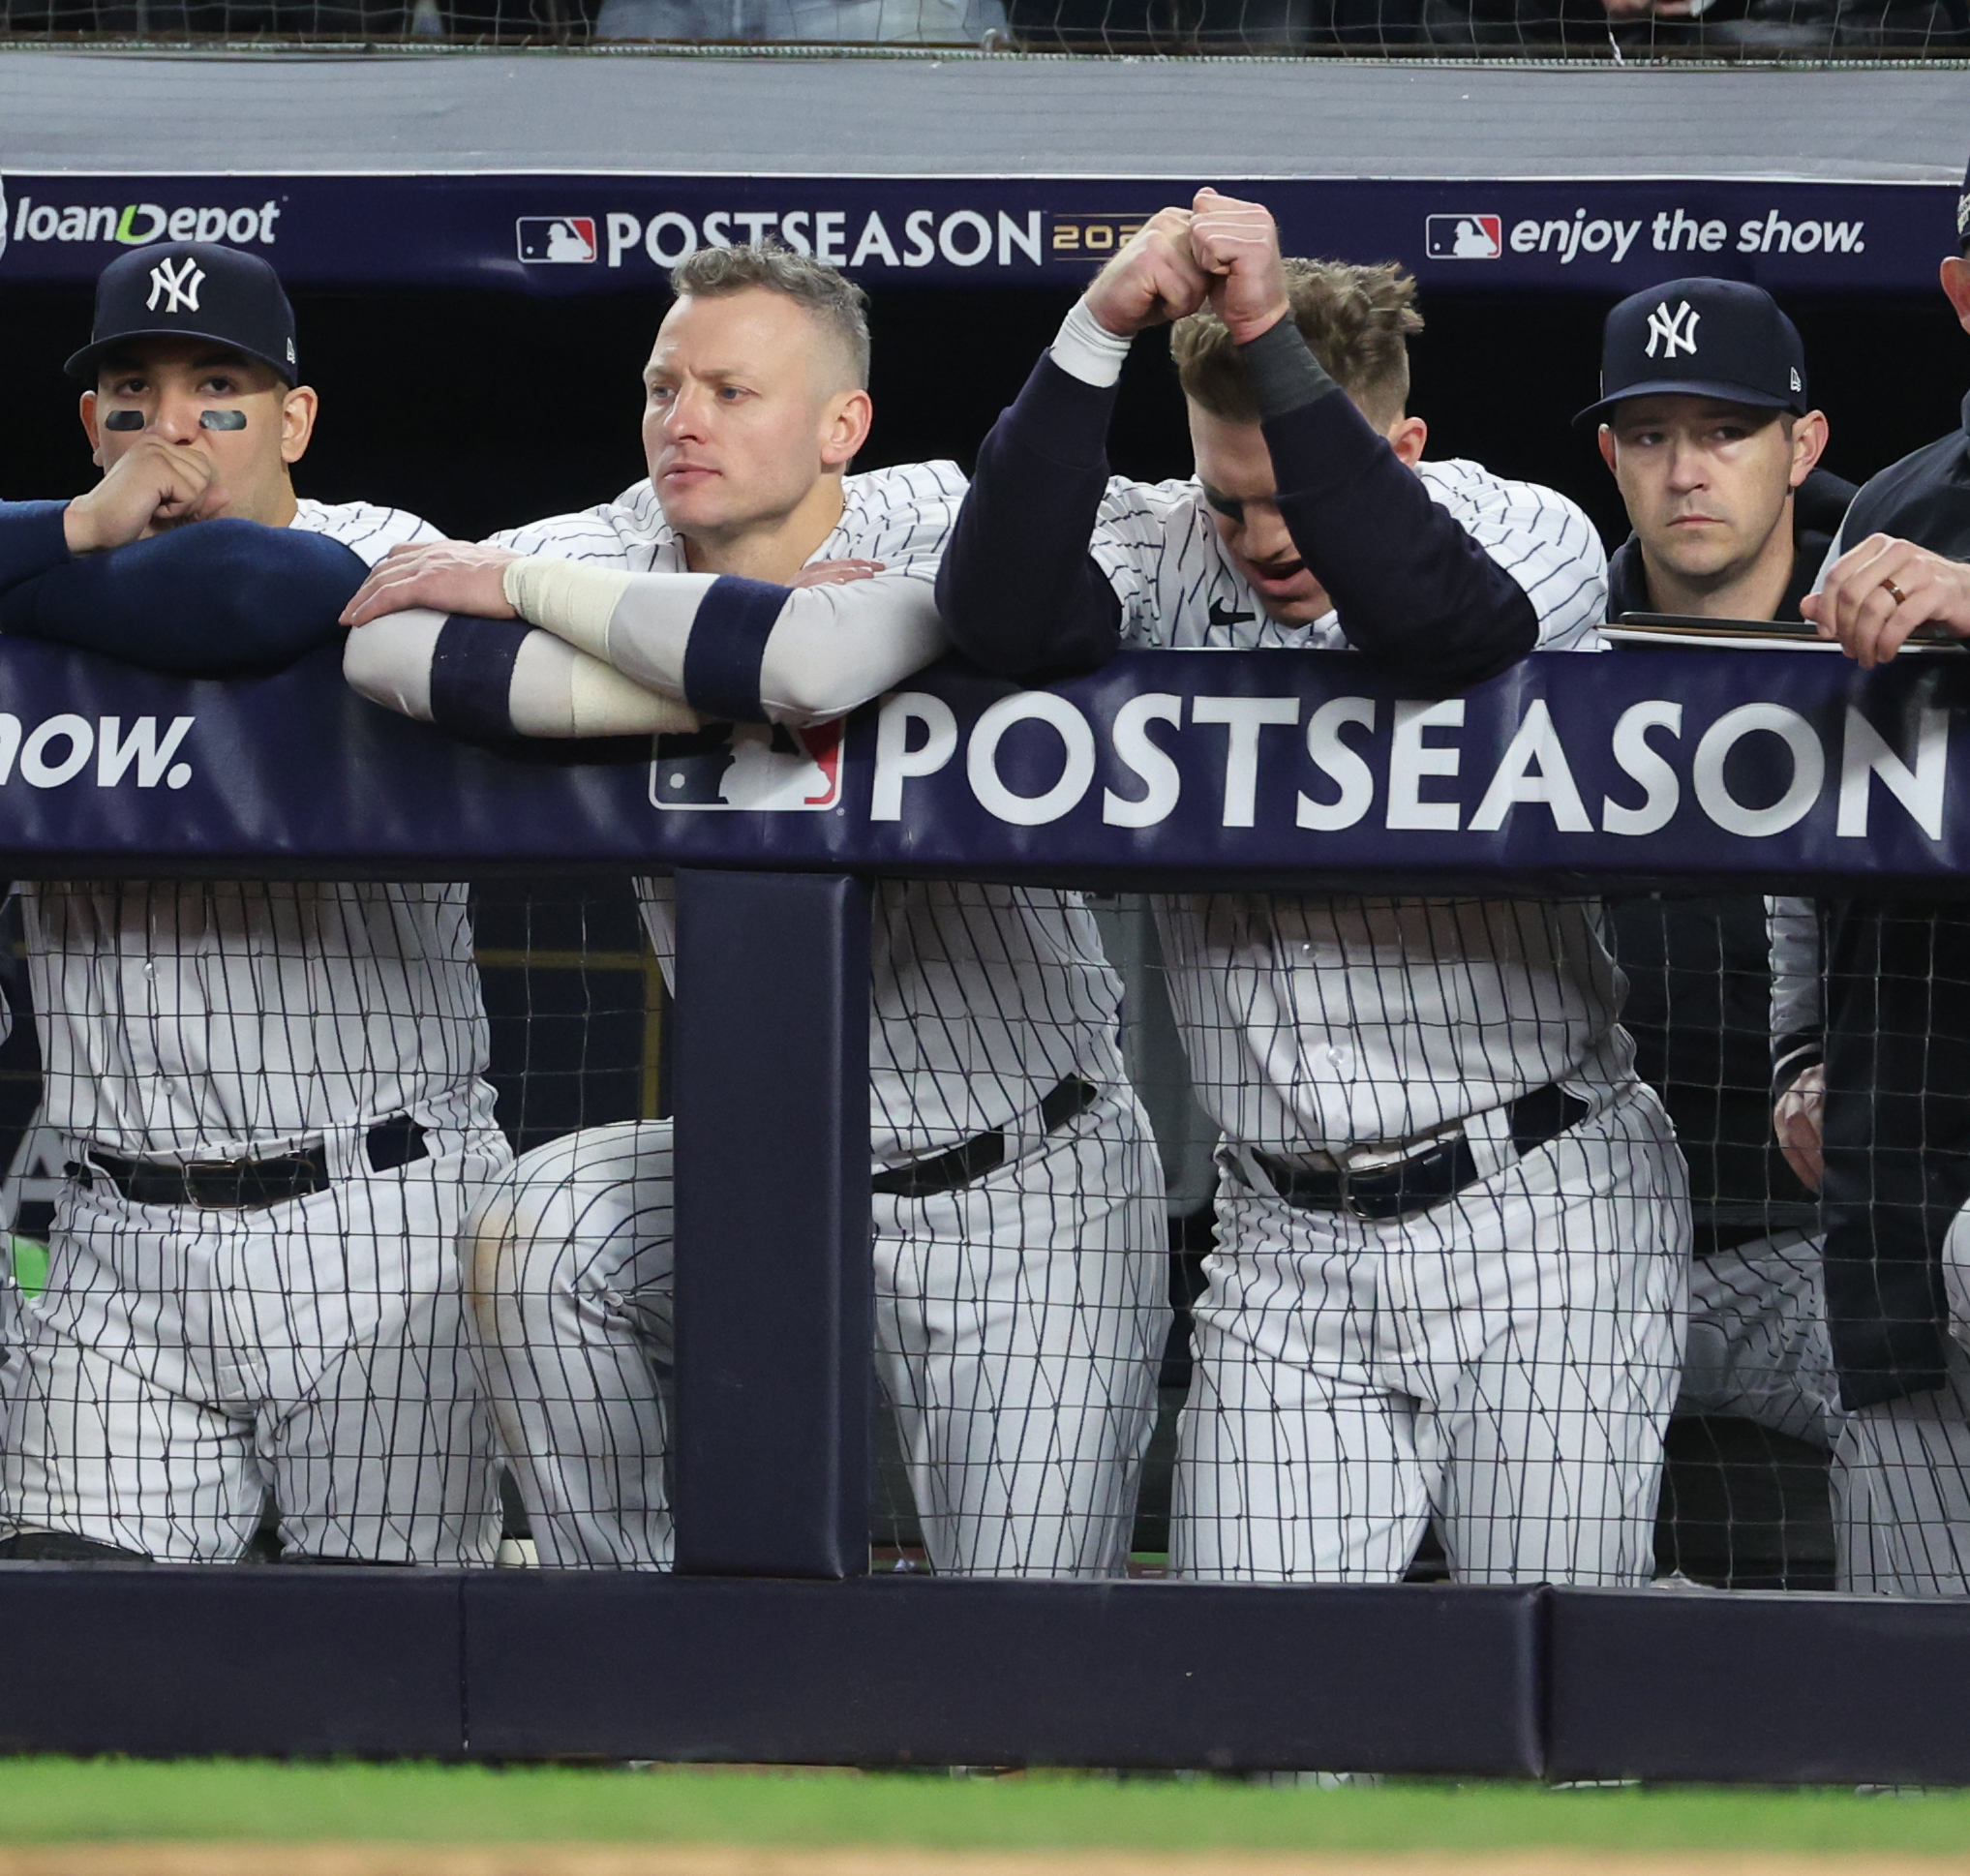 New York Yankees Dugout in the 9th Inning of Game 4 of the ALCS